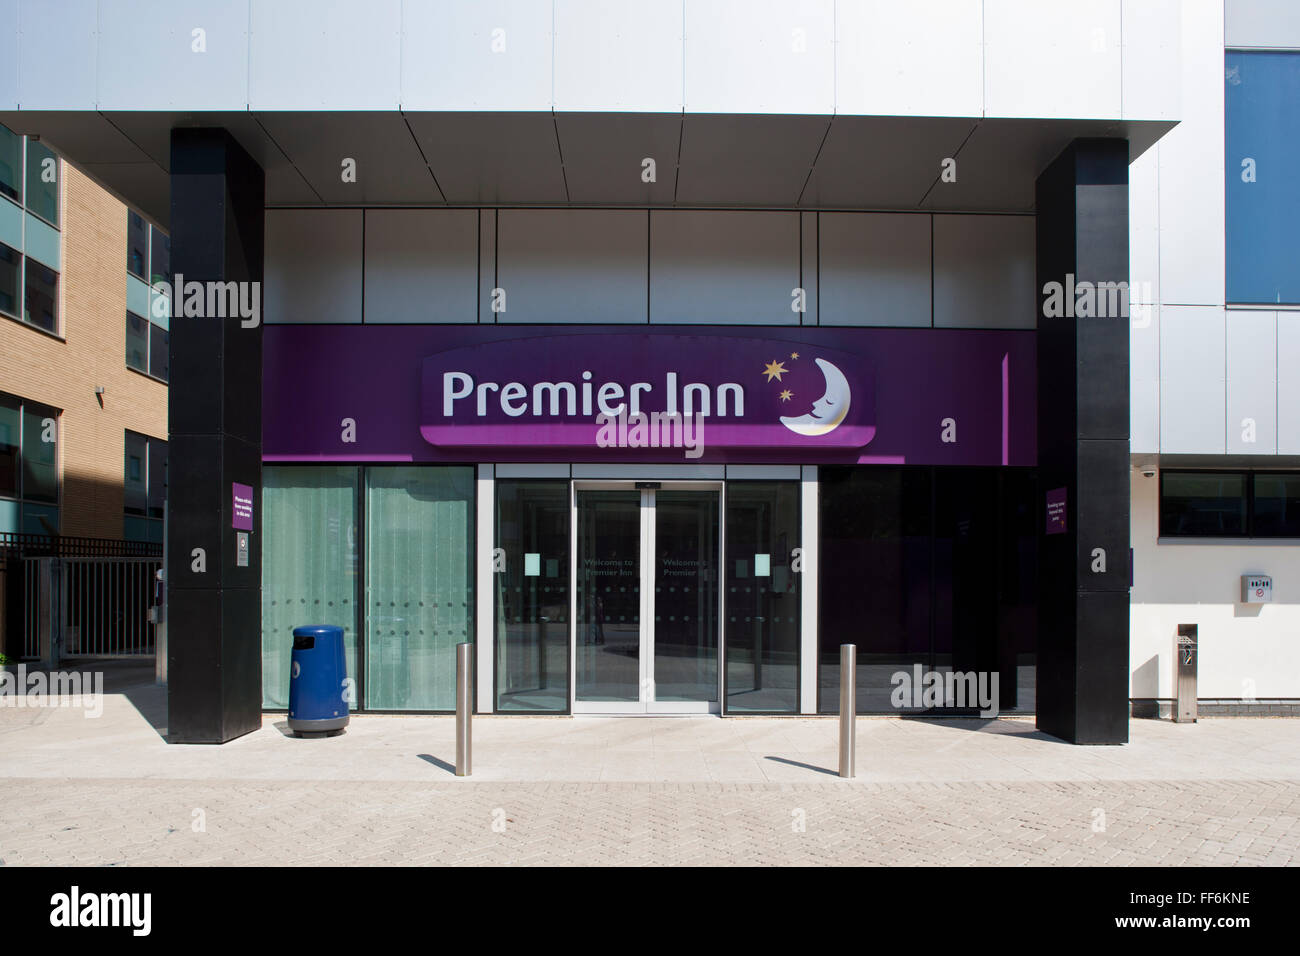 Premier Inn Hotel, Ealing, London designed by MAA Architects Stock Photo